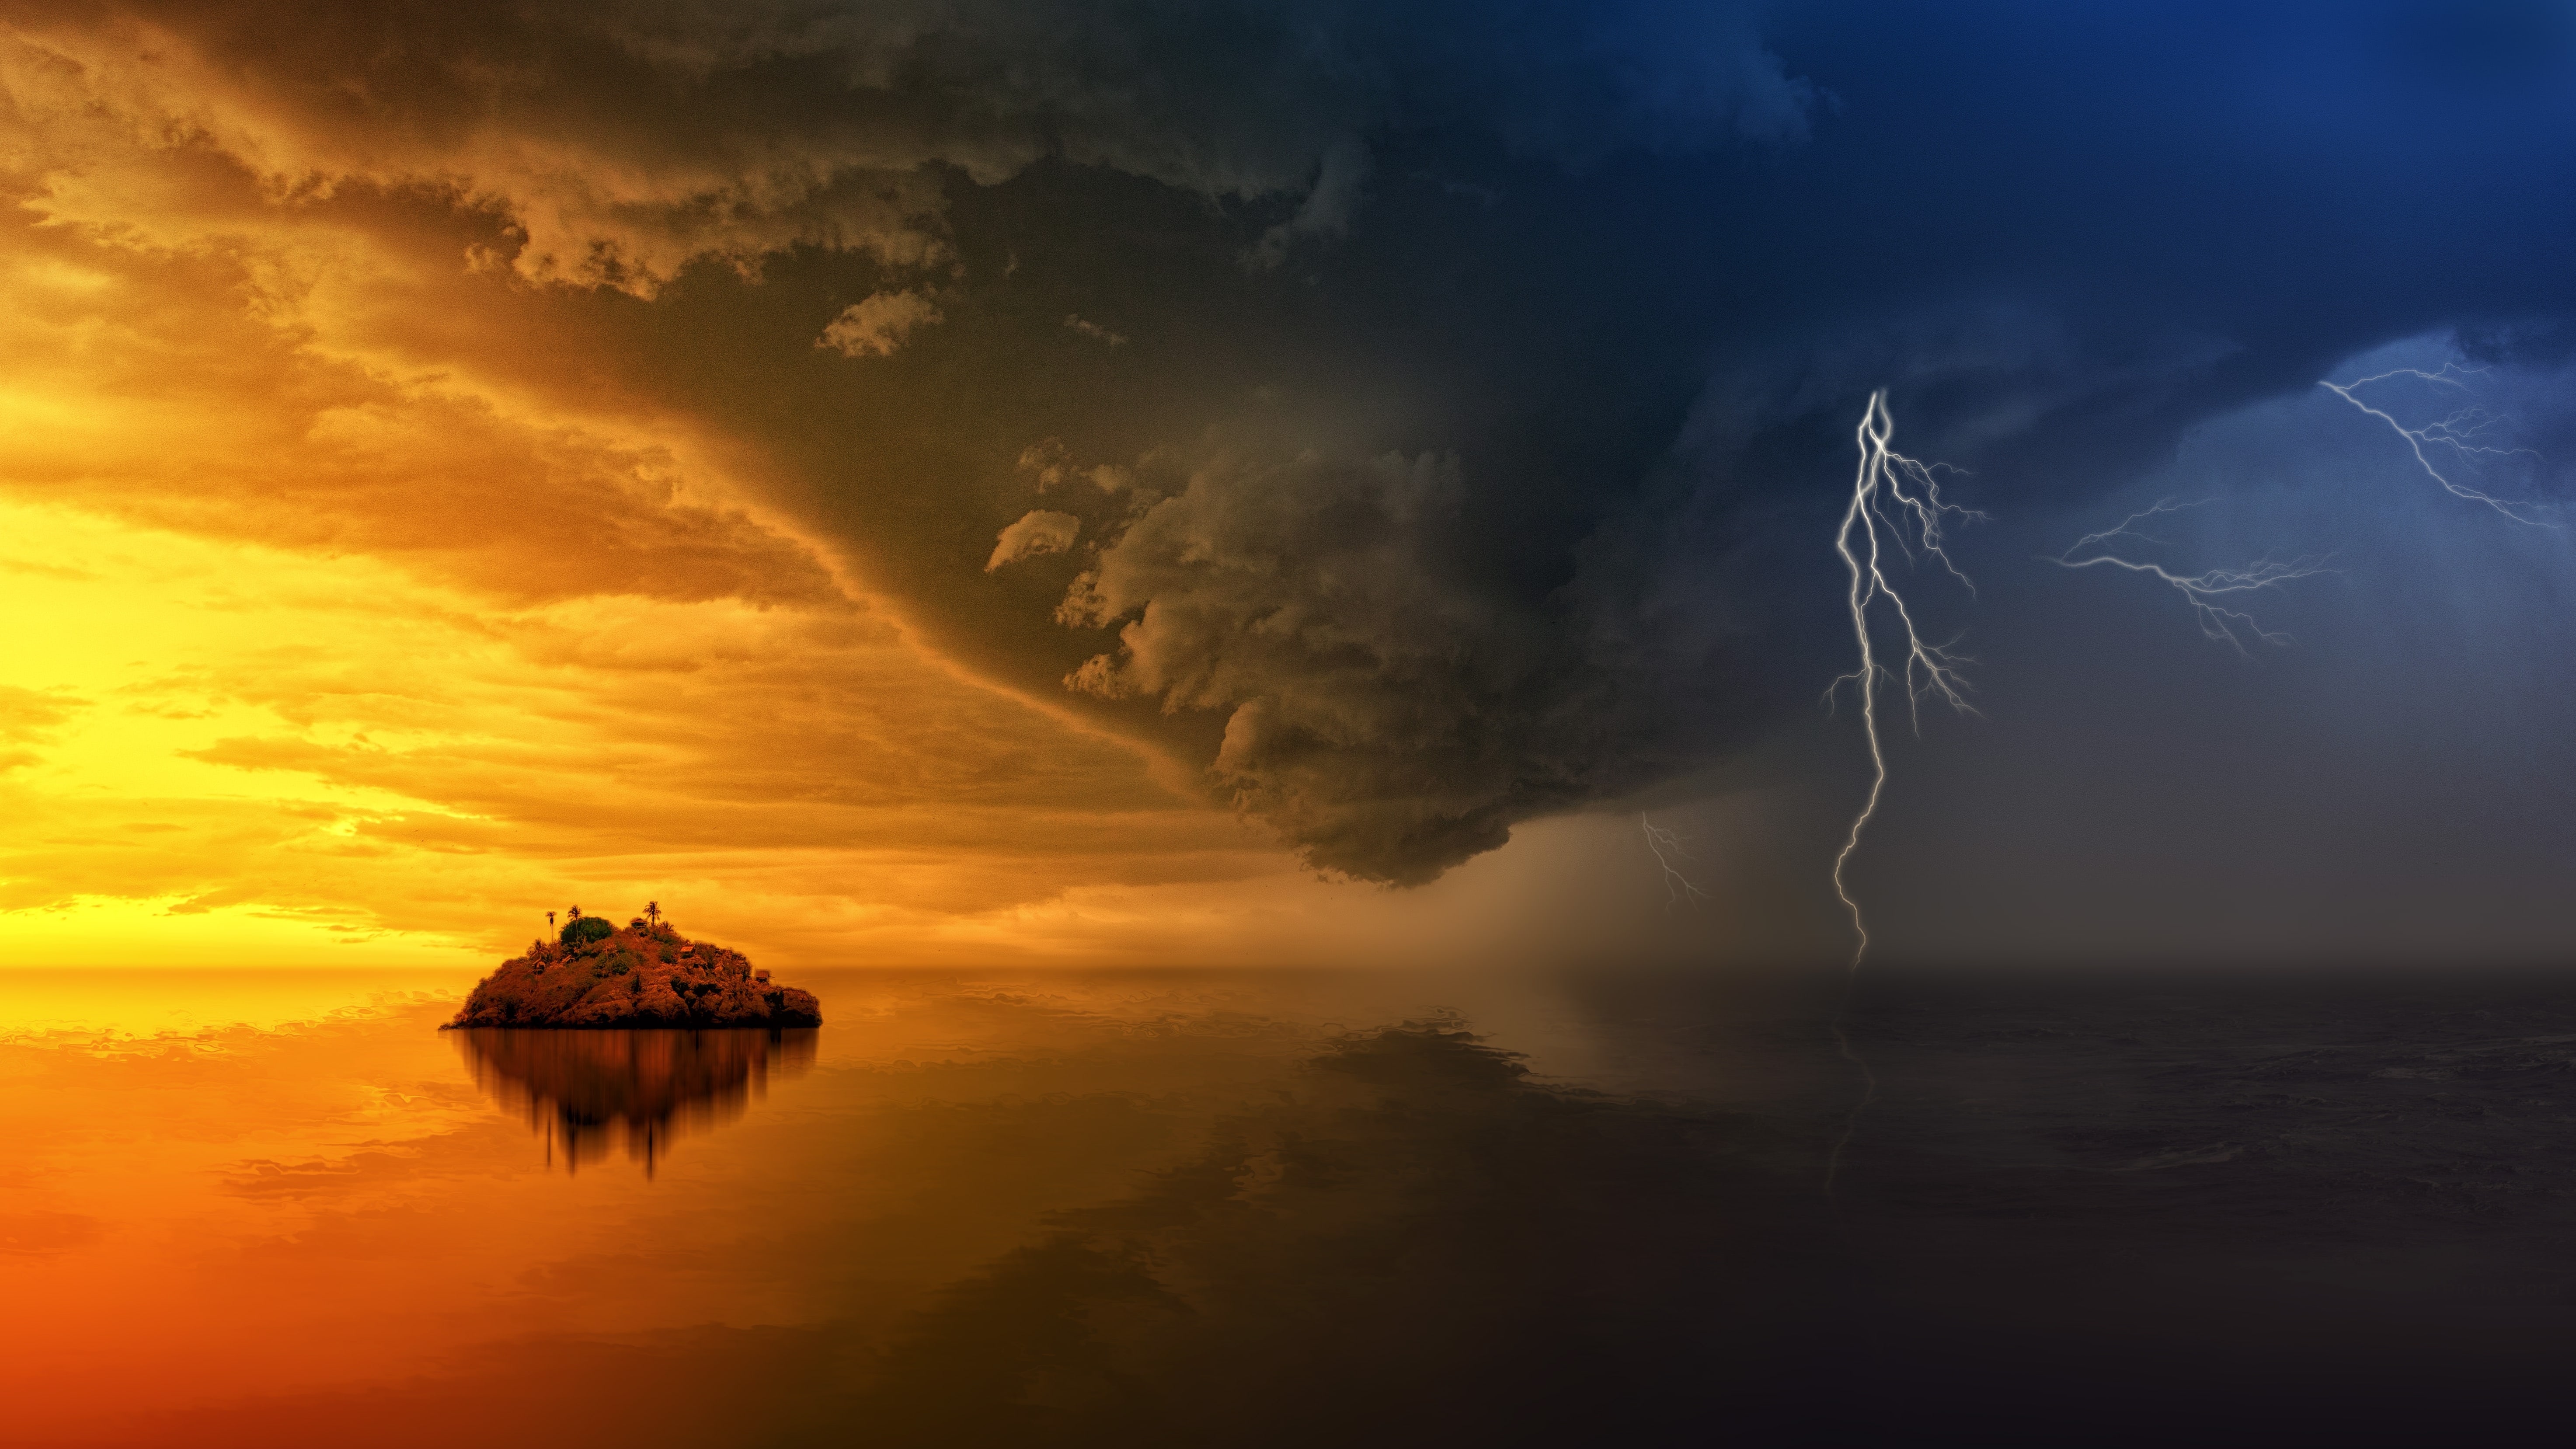 Sunset Nature Sky Dawn Lightning Storm Wallpaper and Free